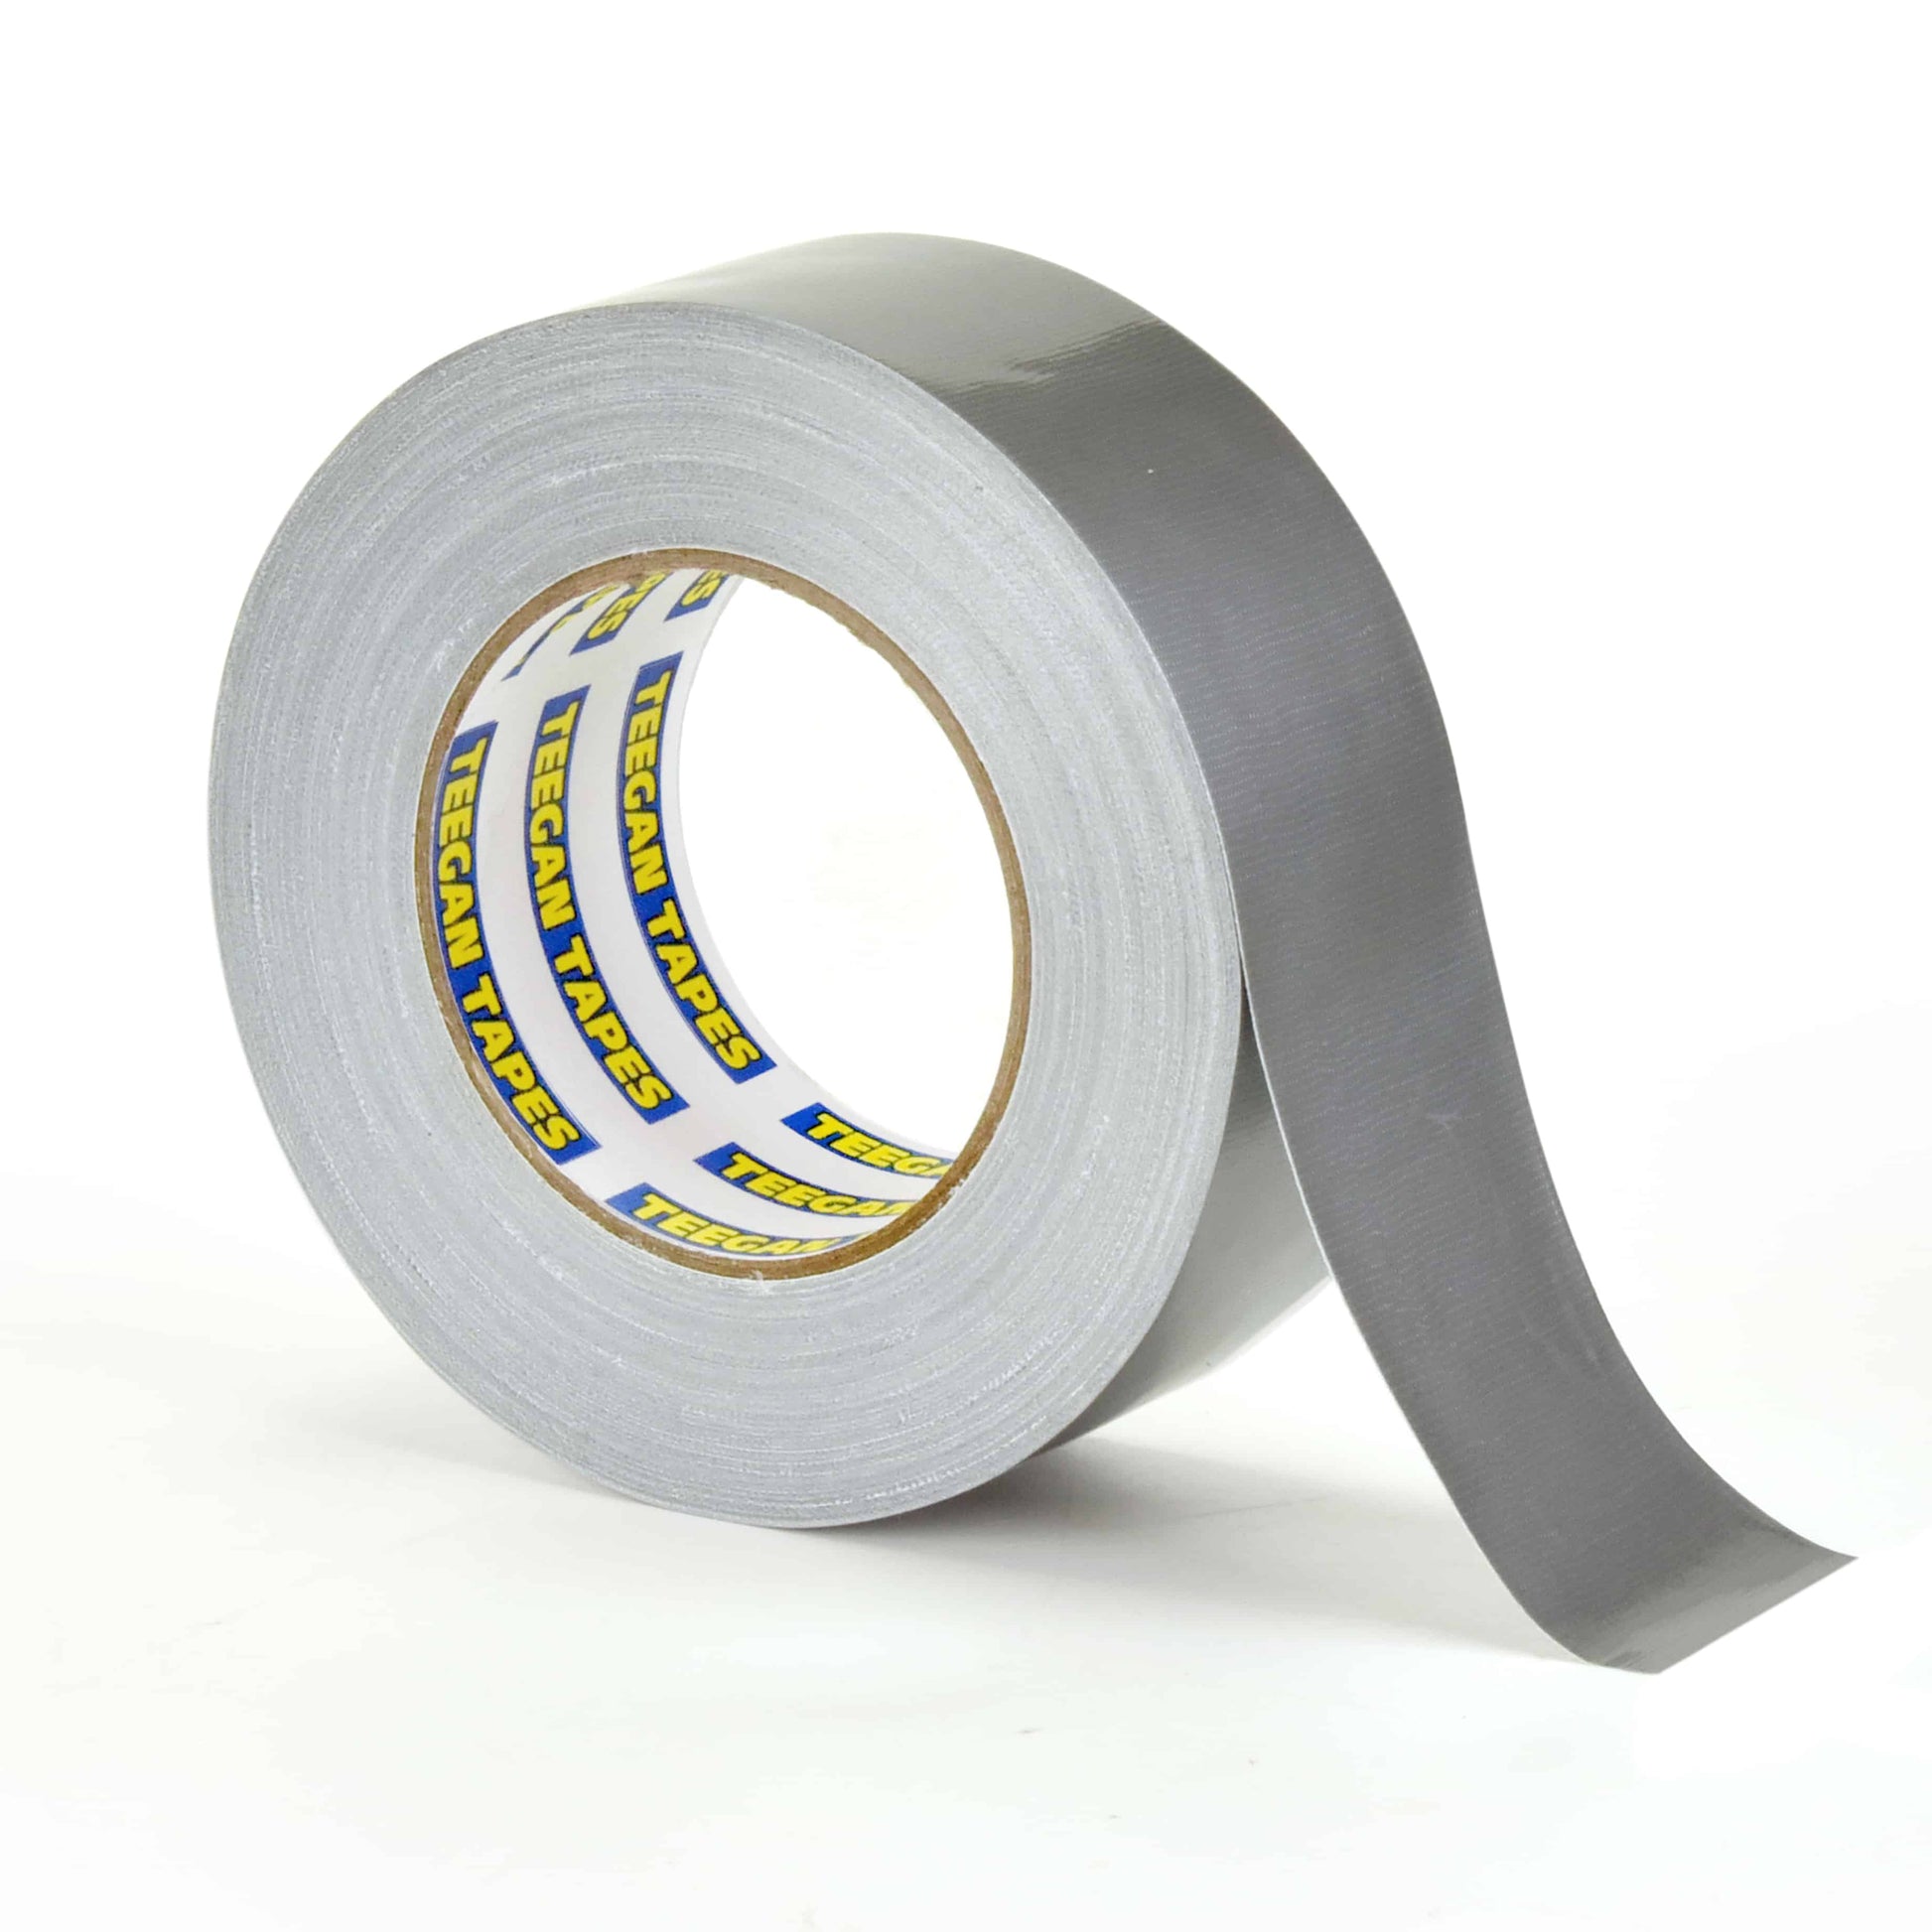 No-Residue Gaffer Tape Heavy Duty Duct Tape - China Tape, Gaffer Tape